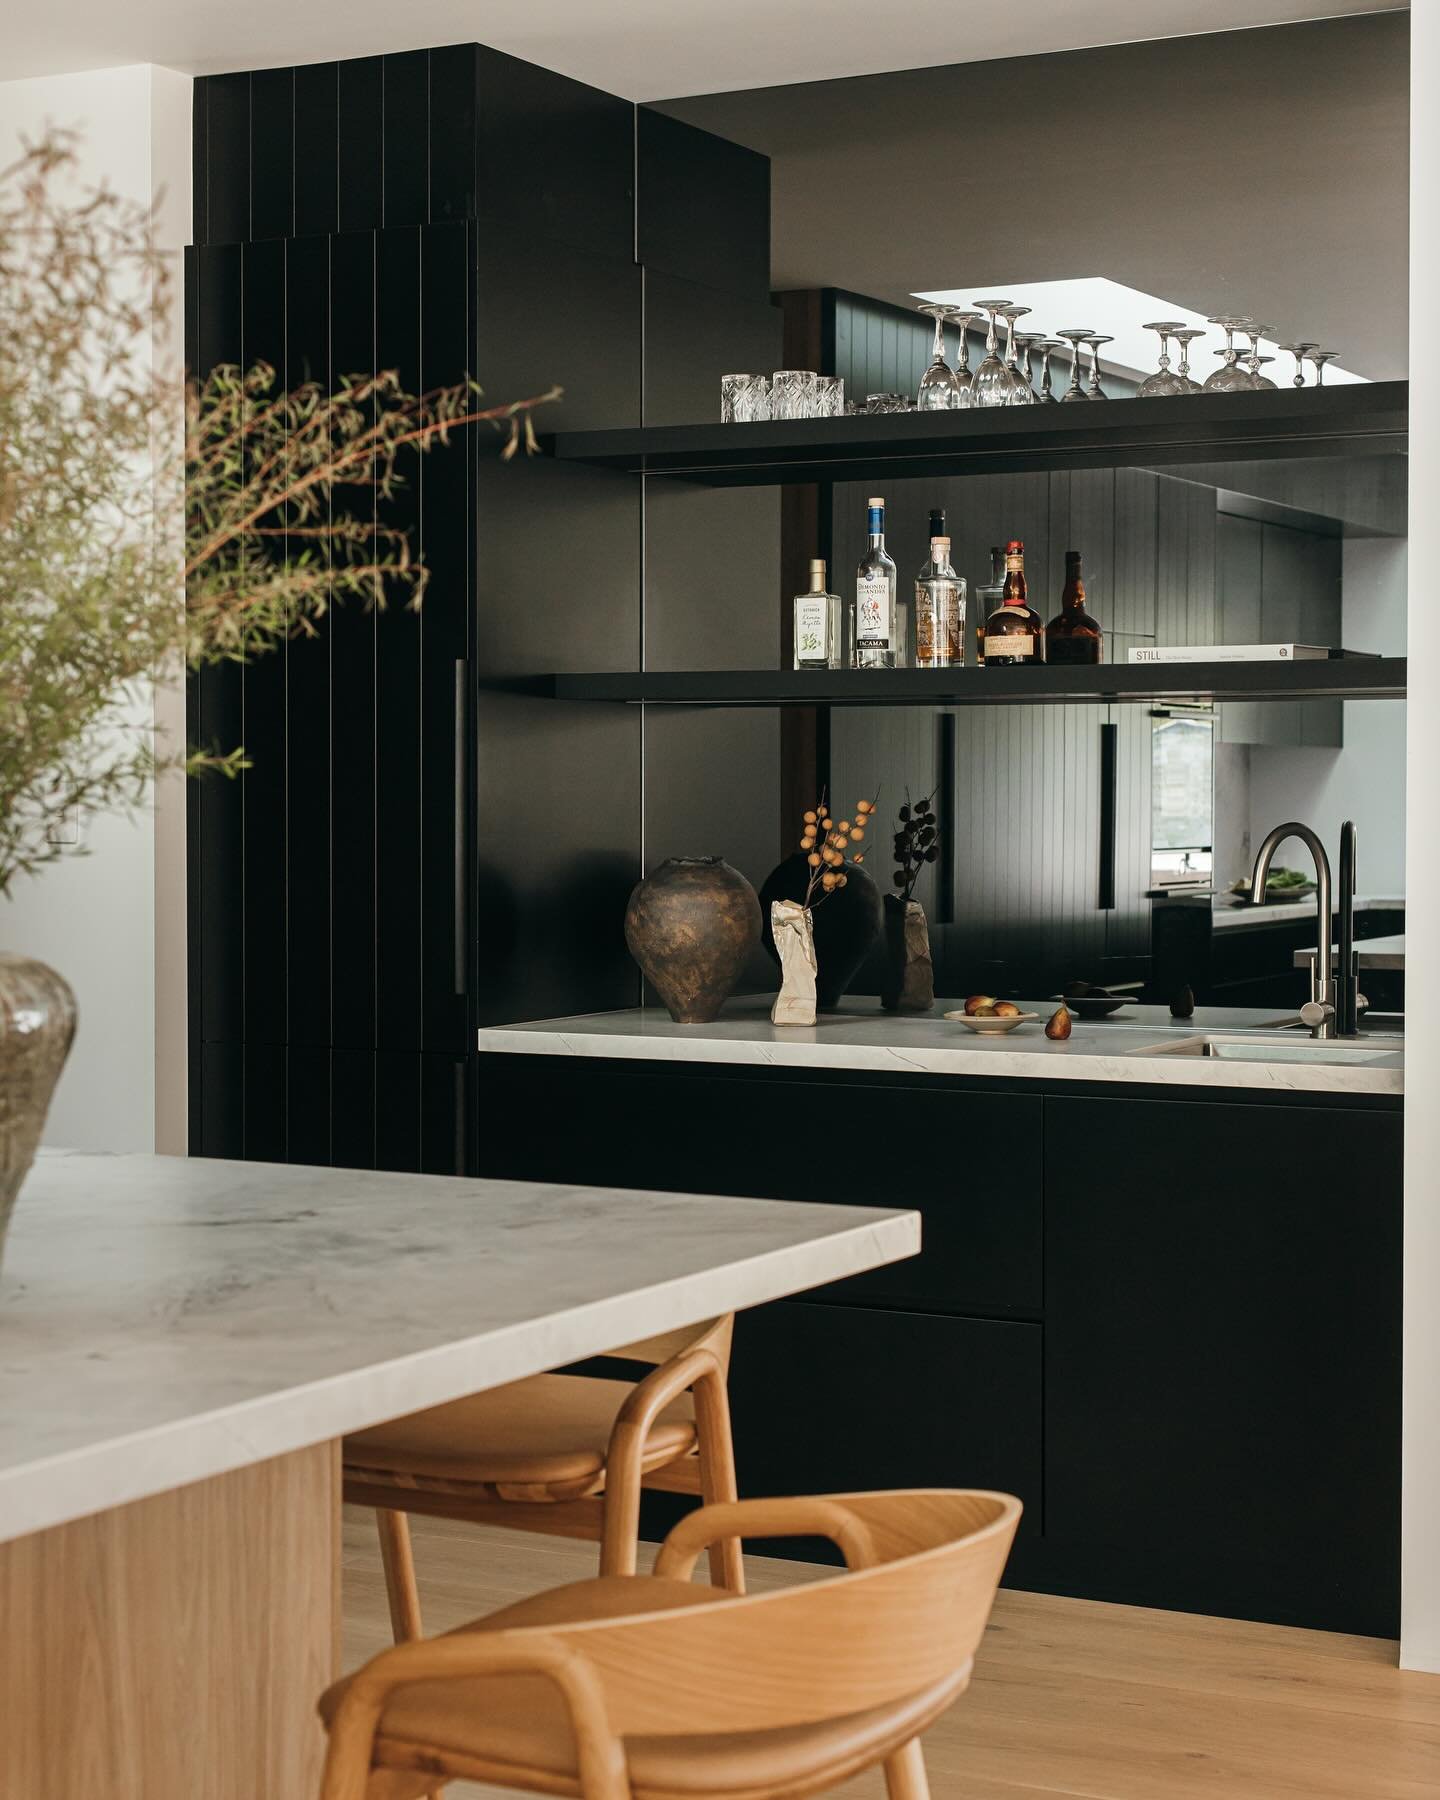 In every home, the kitchen holds a special place, serving as the heart of daily life and cherished memories. 
Crafting the perfect kitchen involves more than just design and construction; it&rsquo;s about infusing your unique style and practical requ